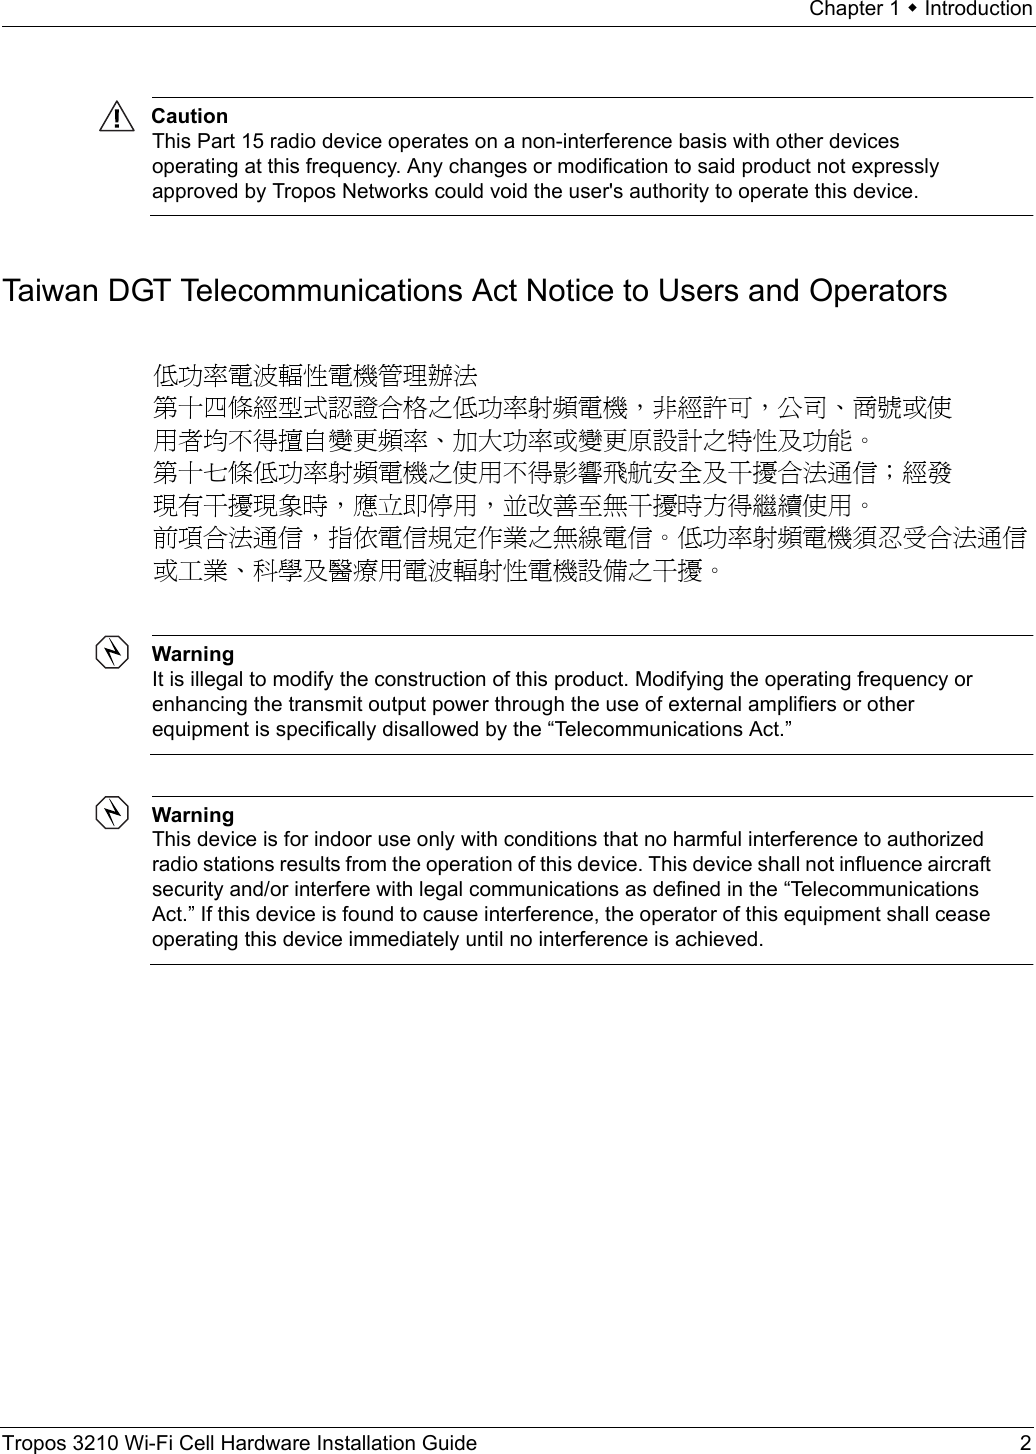 Chapter 1  IntroductionTropos 3210 Wi-Fi Cell Hardware Installation Guide 2CautionThis Part 15 radio device operates on a non-interference basis with other devices operating at this frequency. Any changes or modification to said product not expressly approved by Tropos Networks could void the user&apos;s authority to operate this device.Taiwan DGT Telecommunications Act Notice to Users and OperatorsWarningIt is illegal to modify the construction of this product. Modifying the operating frequency or enhancing the transmit output power through the use of external amplifiers or other equipment is specifically disallowed by the “Telecommunications Act.”WarningThis device is for indoor use only with conditions that no harmful interference to authorized radio stations results from the operation of this device. This device shall not influence aircraft security and/or interfere with legal communications as defined in the “Telecommunications Act.” If this device is found to cause interference, the operator of this equipment shall cease operating this device immediately until no interference is achieved. 低功率電波輻性電機管理辦法 第十四條經型式認證合格之低功率射頻電機，非經許可，公司、商號或使 用者均不得擅自變更頻率、加大功率或變更原設計之特性及功能。 第十七條低功率射頻電機之使用不得影響飛航安全及干擾合法通信；經發 現有干擾現象時，應立即停用，並改善至無干擾時方得繼續使用。 前項合法通信，指依電信規定作業之無線電信。低功率射頻電機須忍受合法通信 或工業、科學及醫療用電波輻射性電機設備之干擾。 